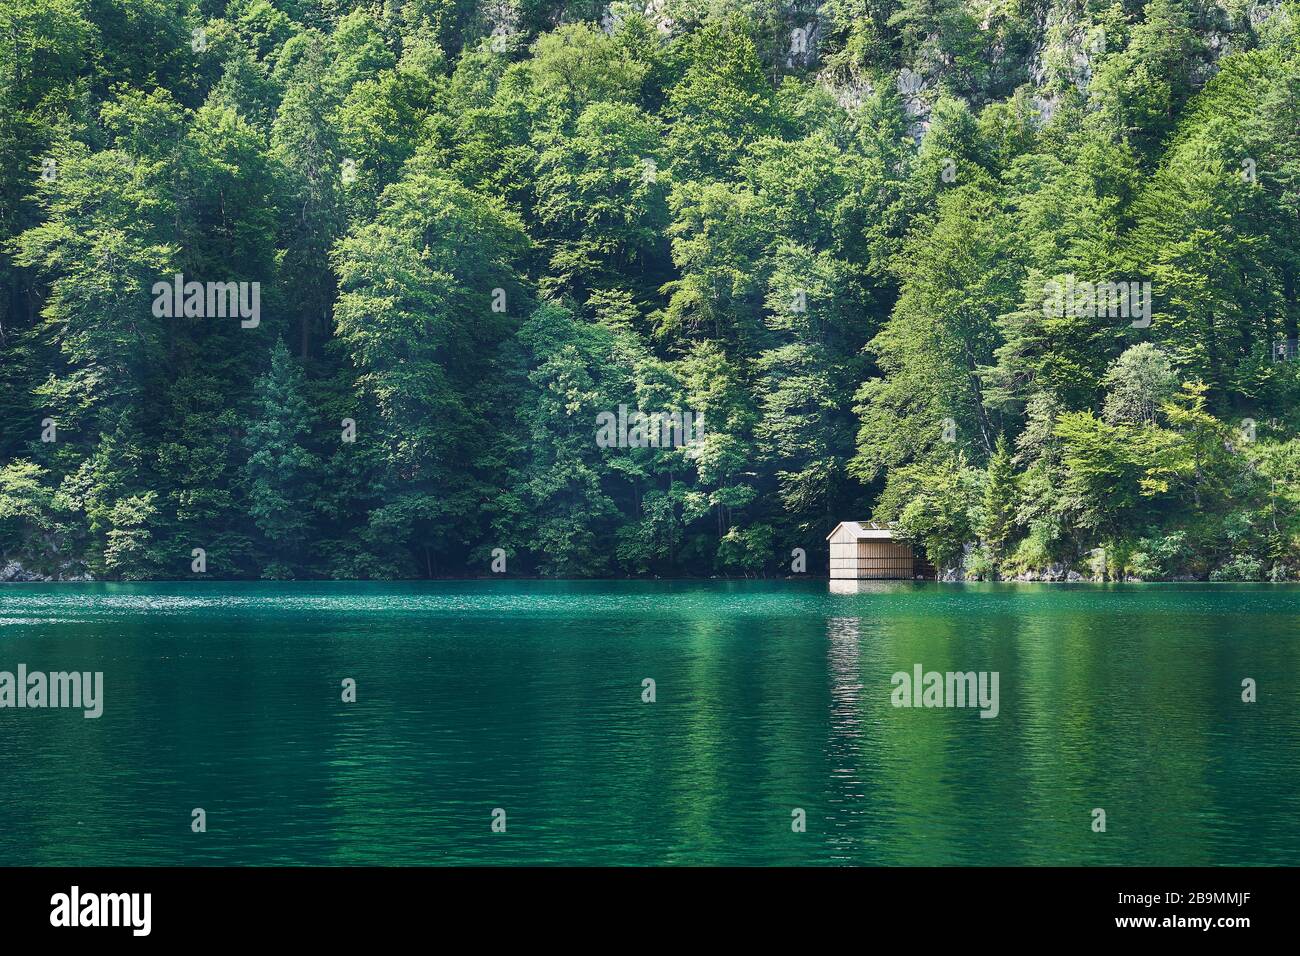 A cottage hidden among trees at the shor of a green coloured lake. Stock Photo